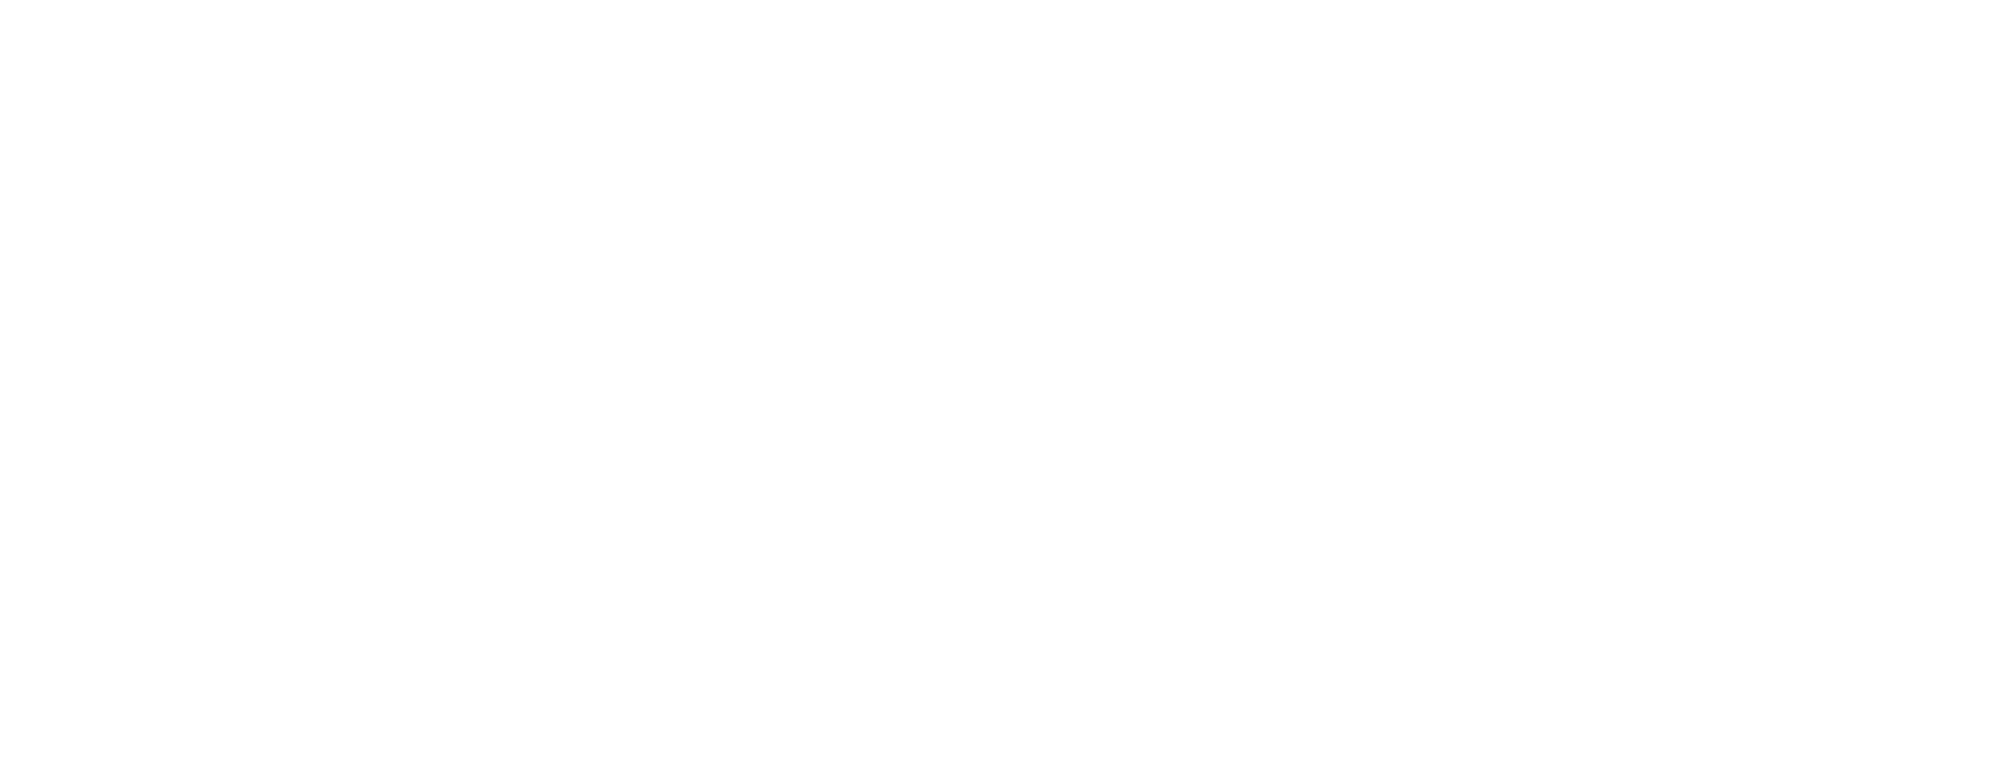 OpenFF Toolkit 0.13.1+0.g49f84c6e.dirty documentation logo